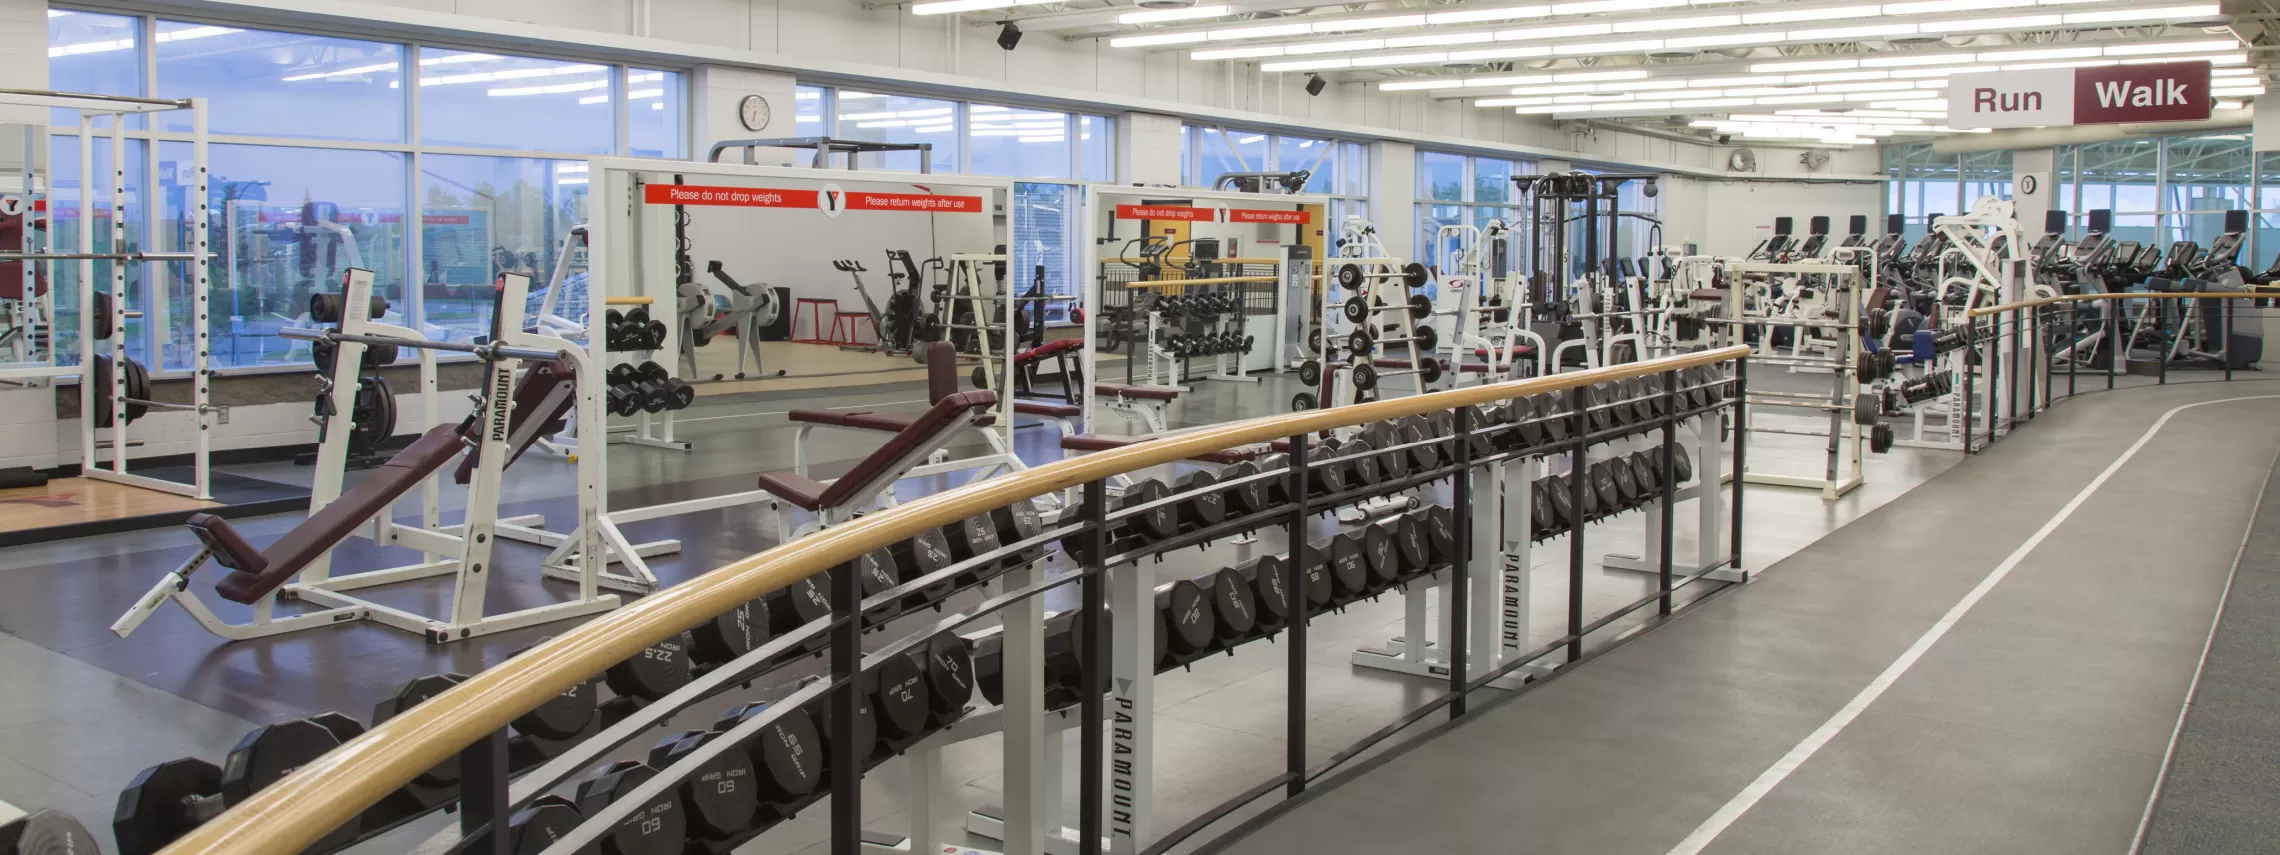 A fitness centre filled with various weight and cardio equiptment and an indoor track.